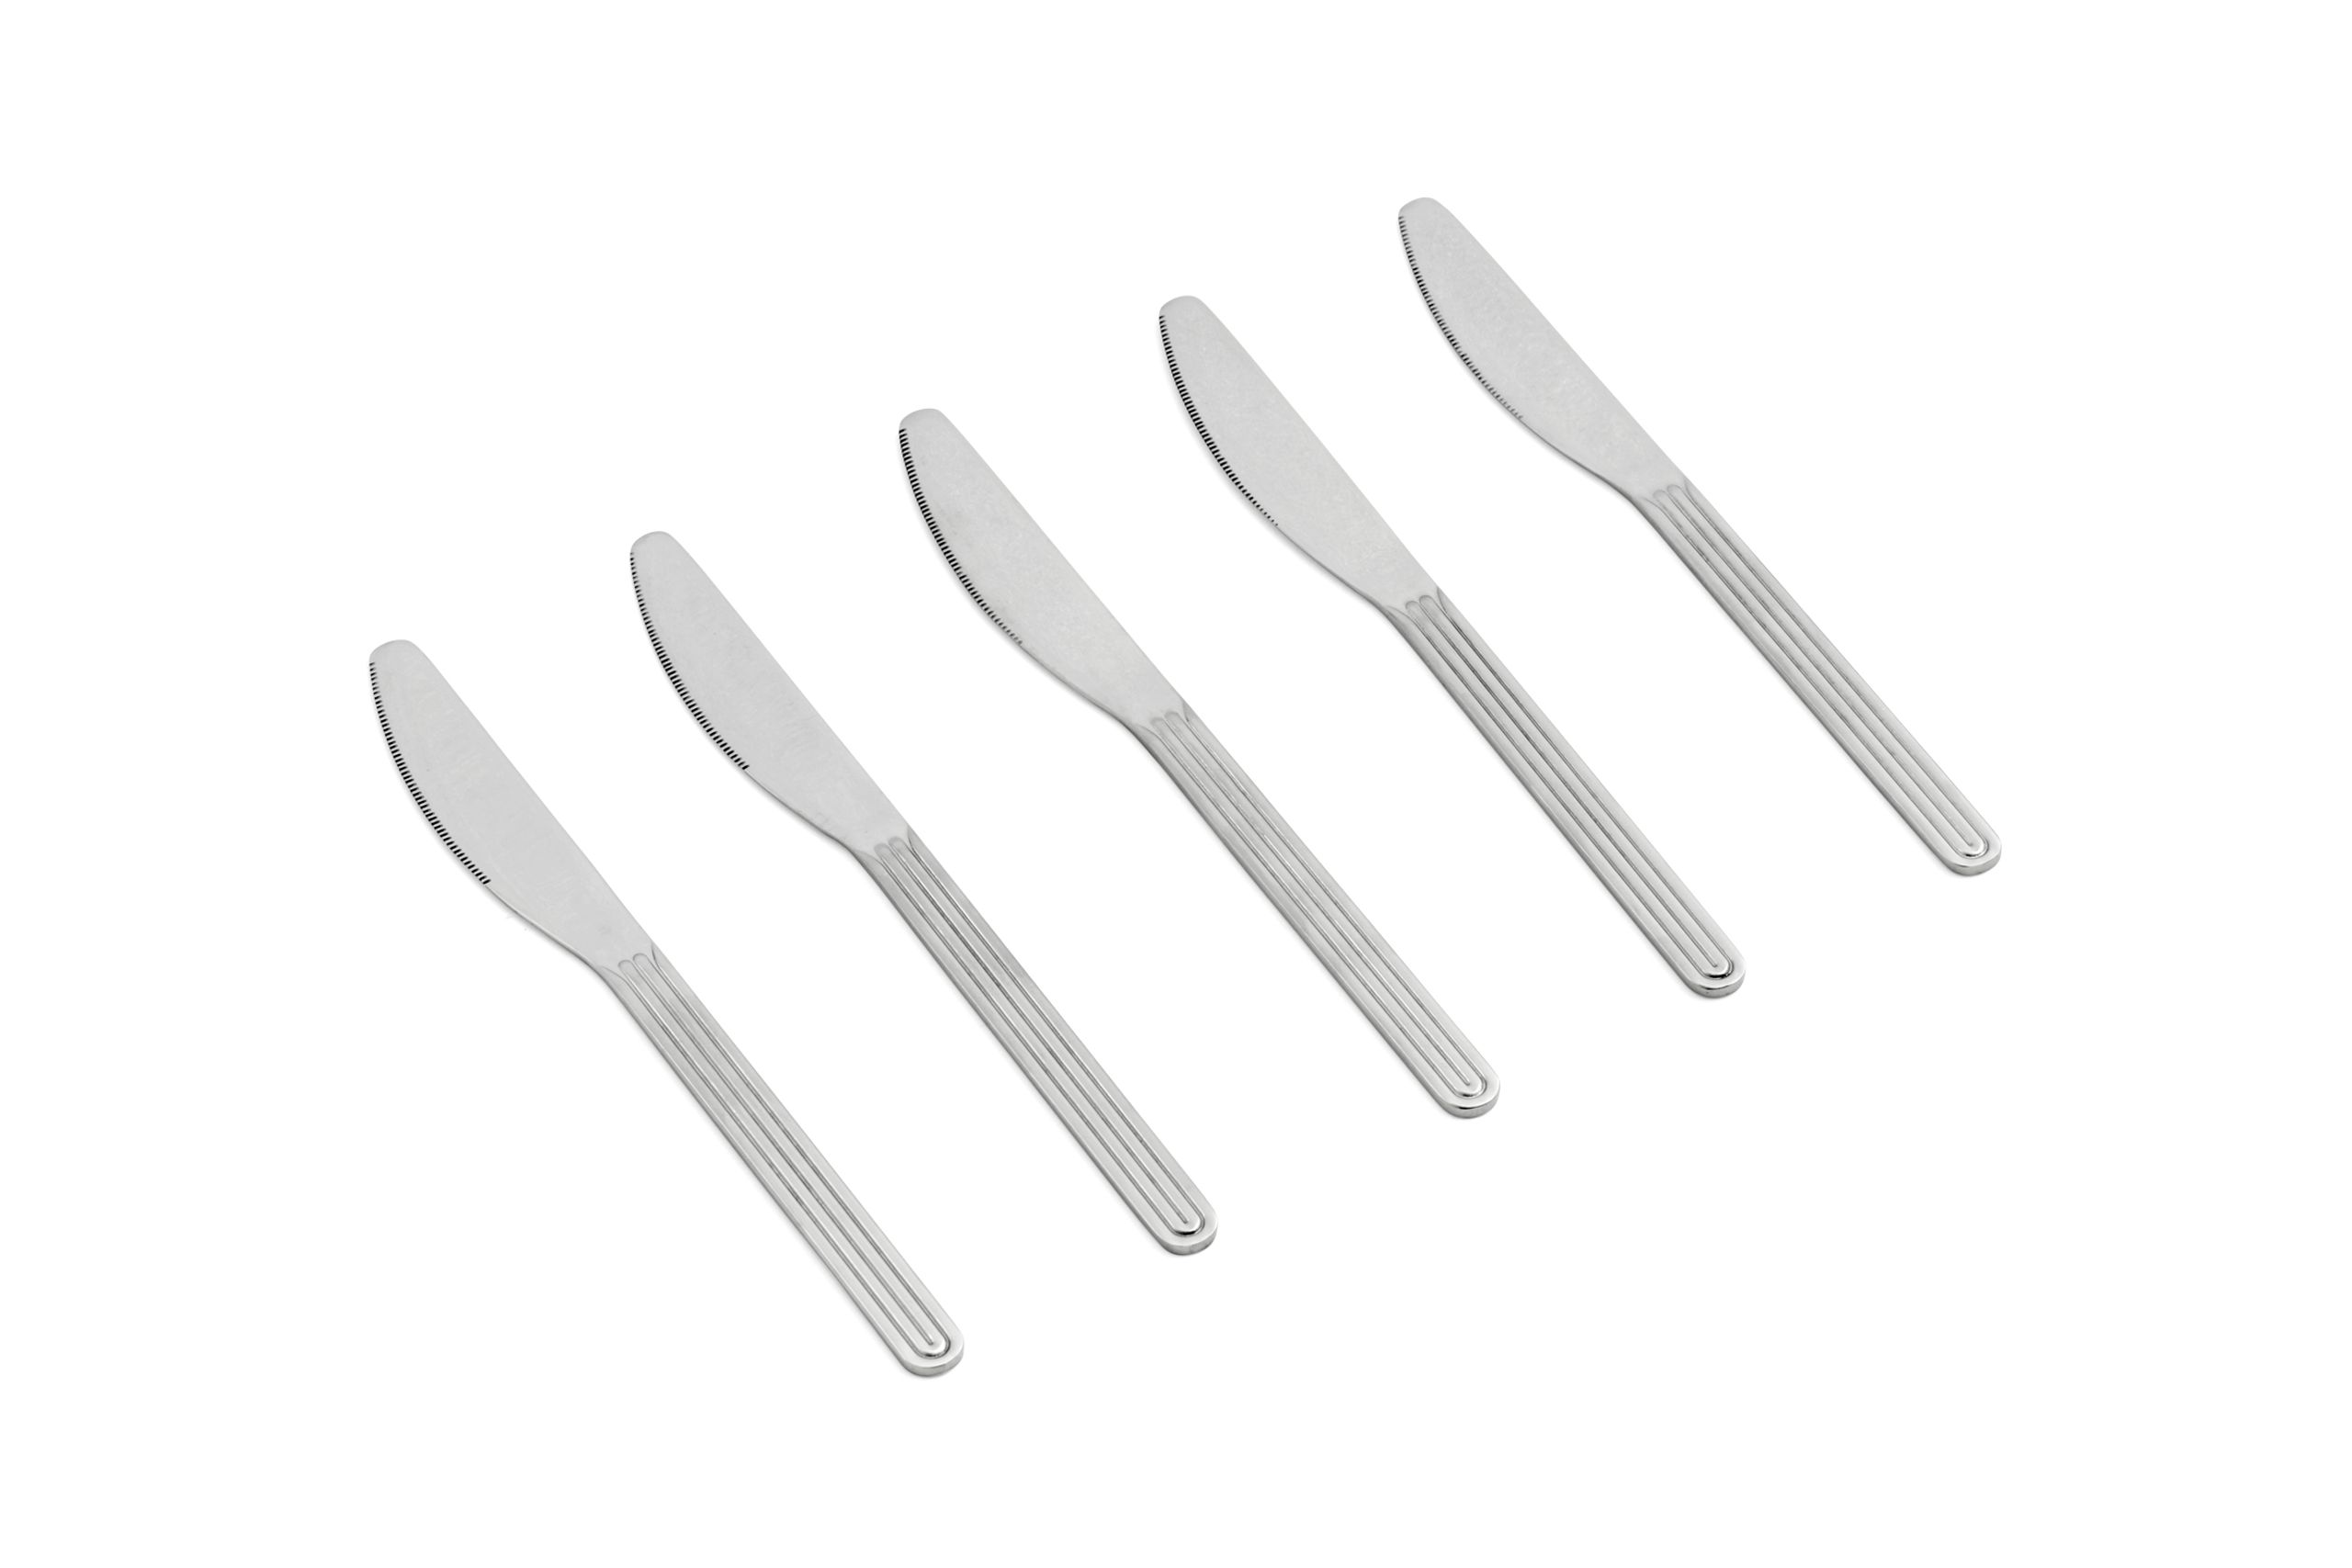 HAY - Cutlery - SUNDAY HAY - KNIFE 5 PCS - STAINLESS STEEL